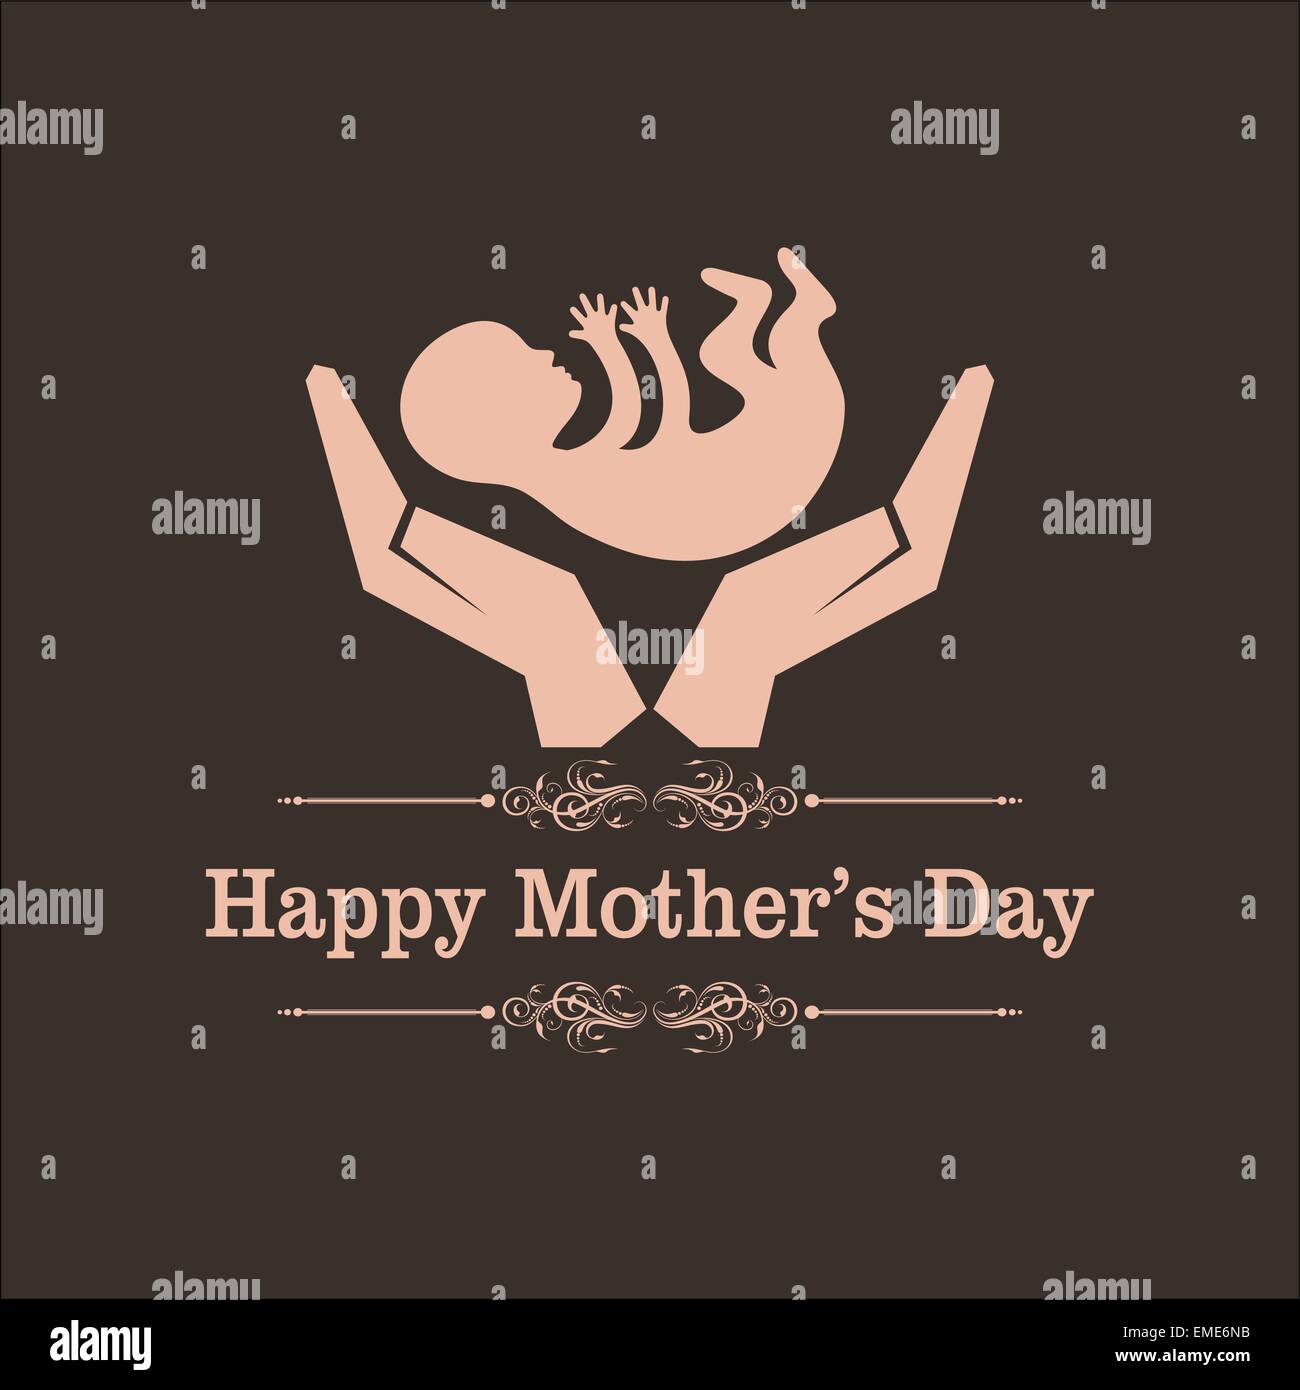 Happy mothers day greeting with caring concept stock vector Stock Vector